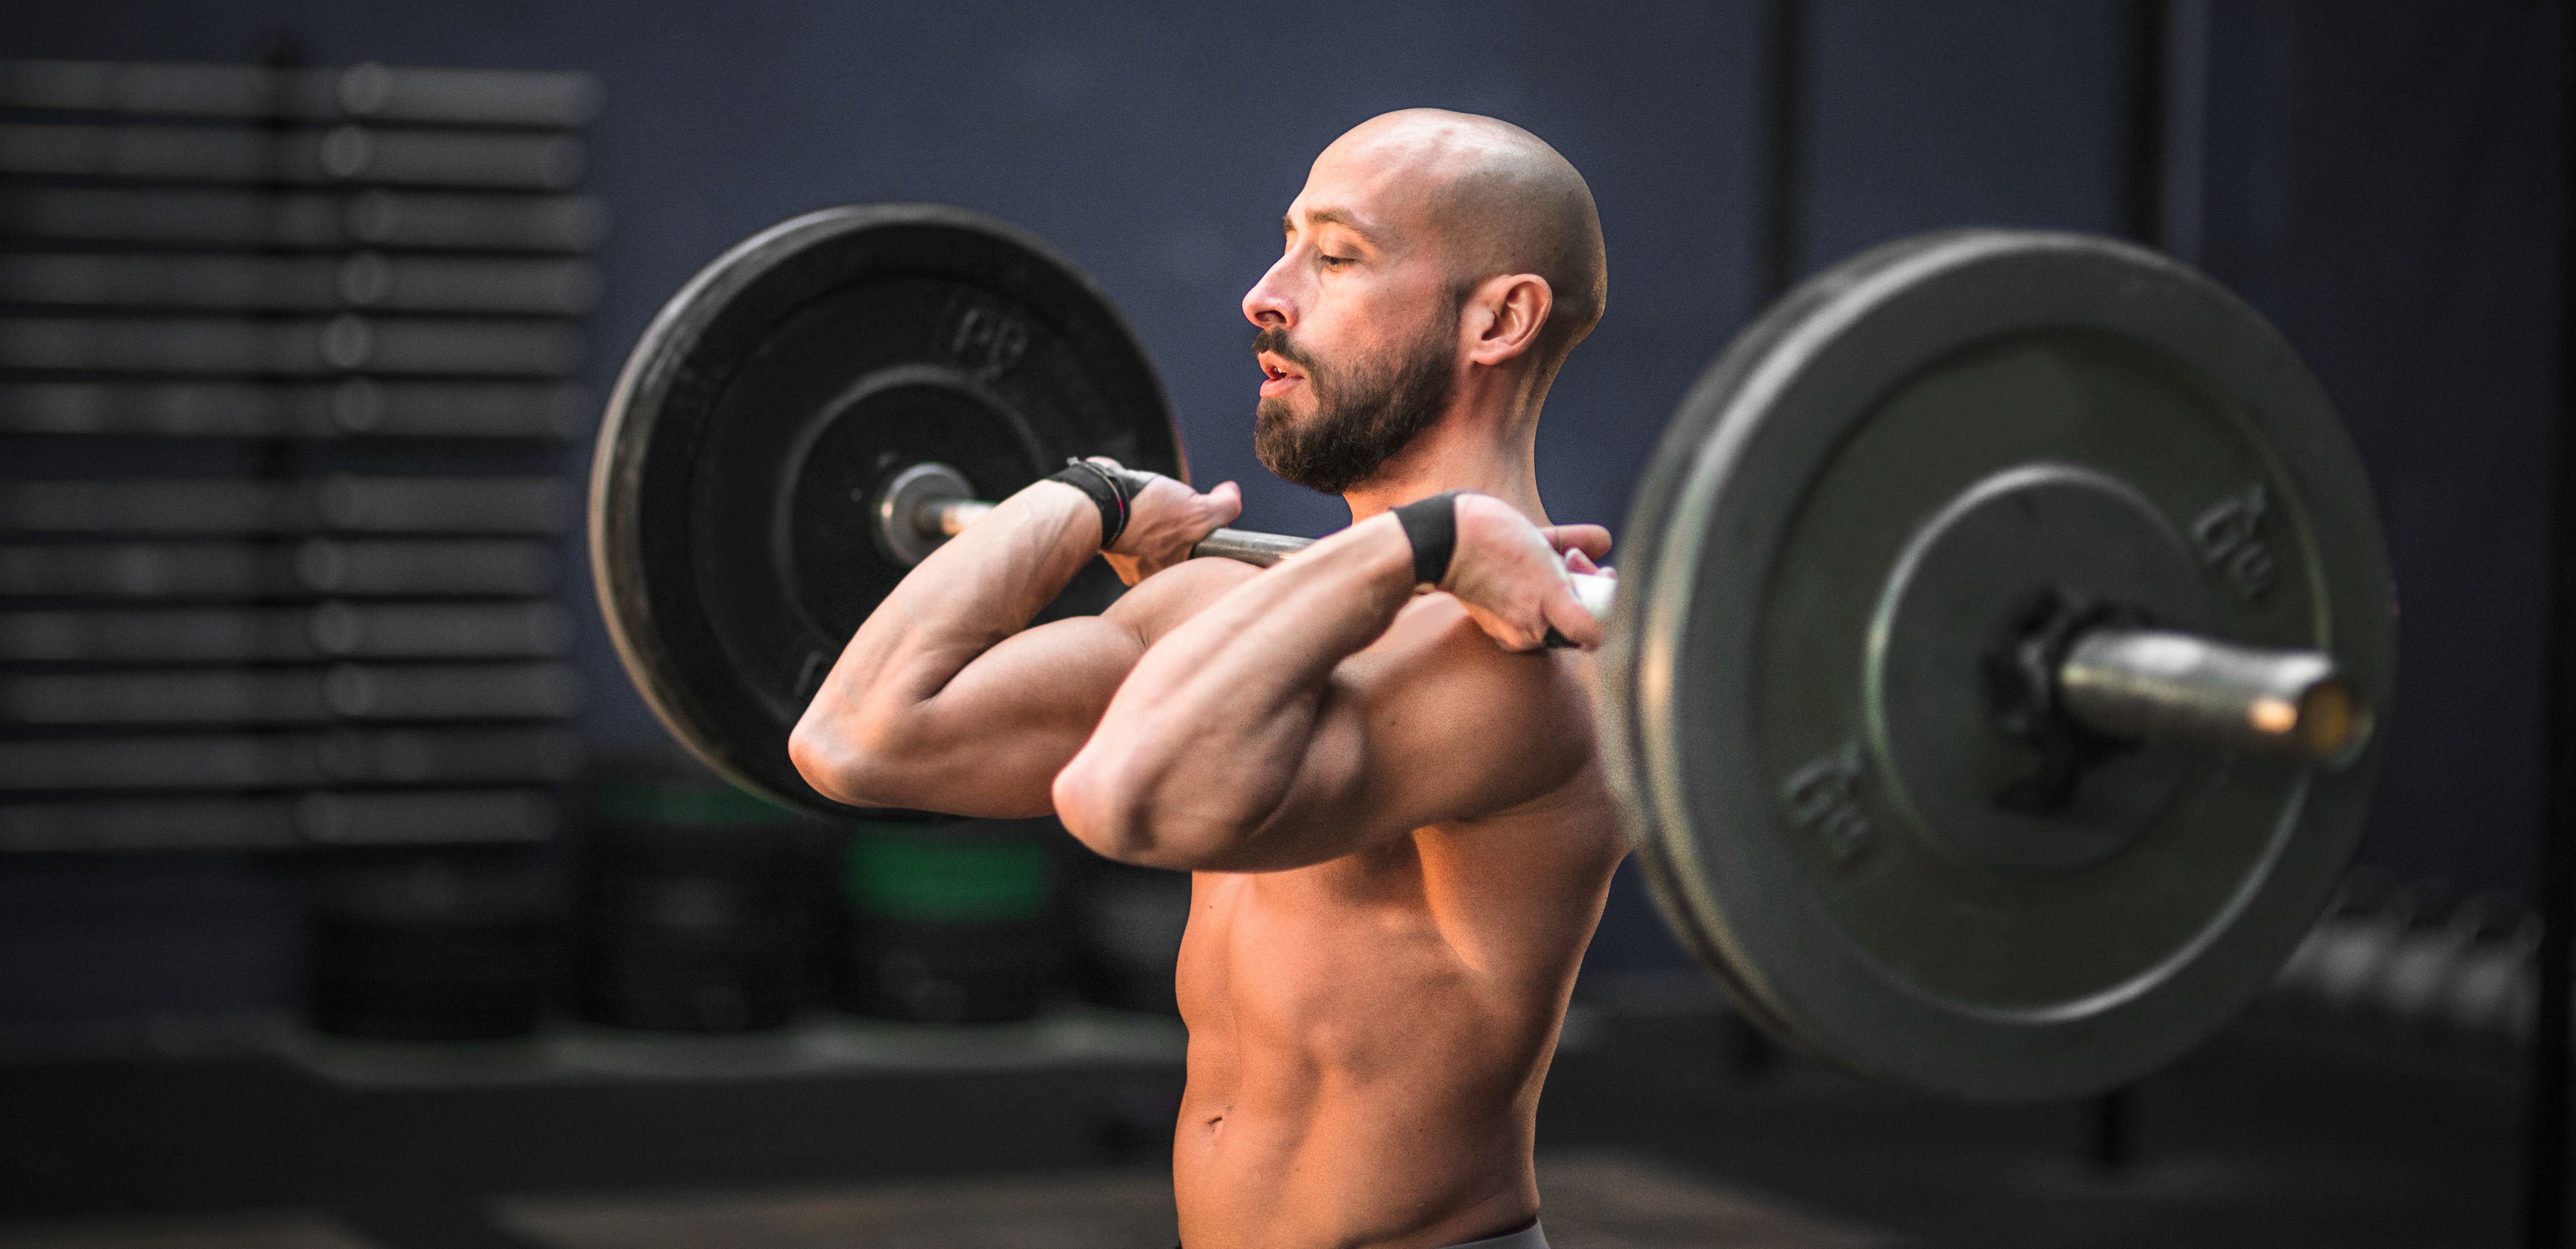 Olympic weightlifting exercises